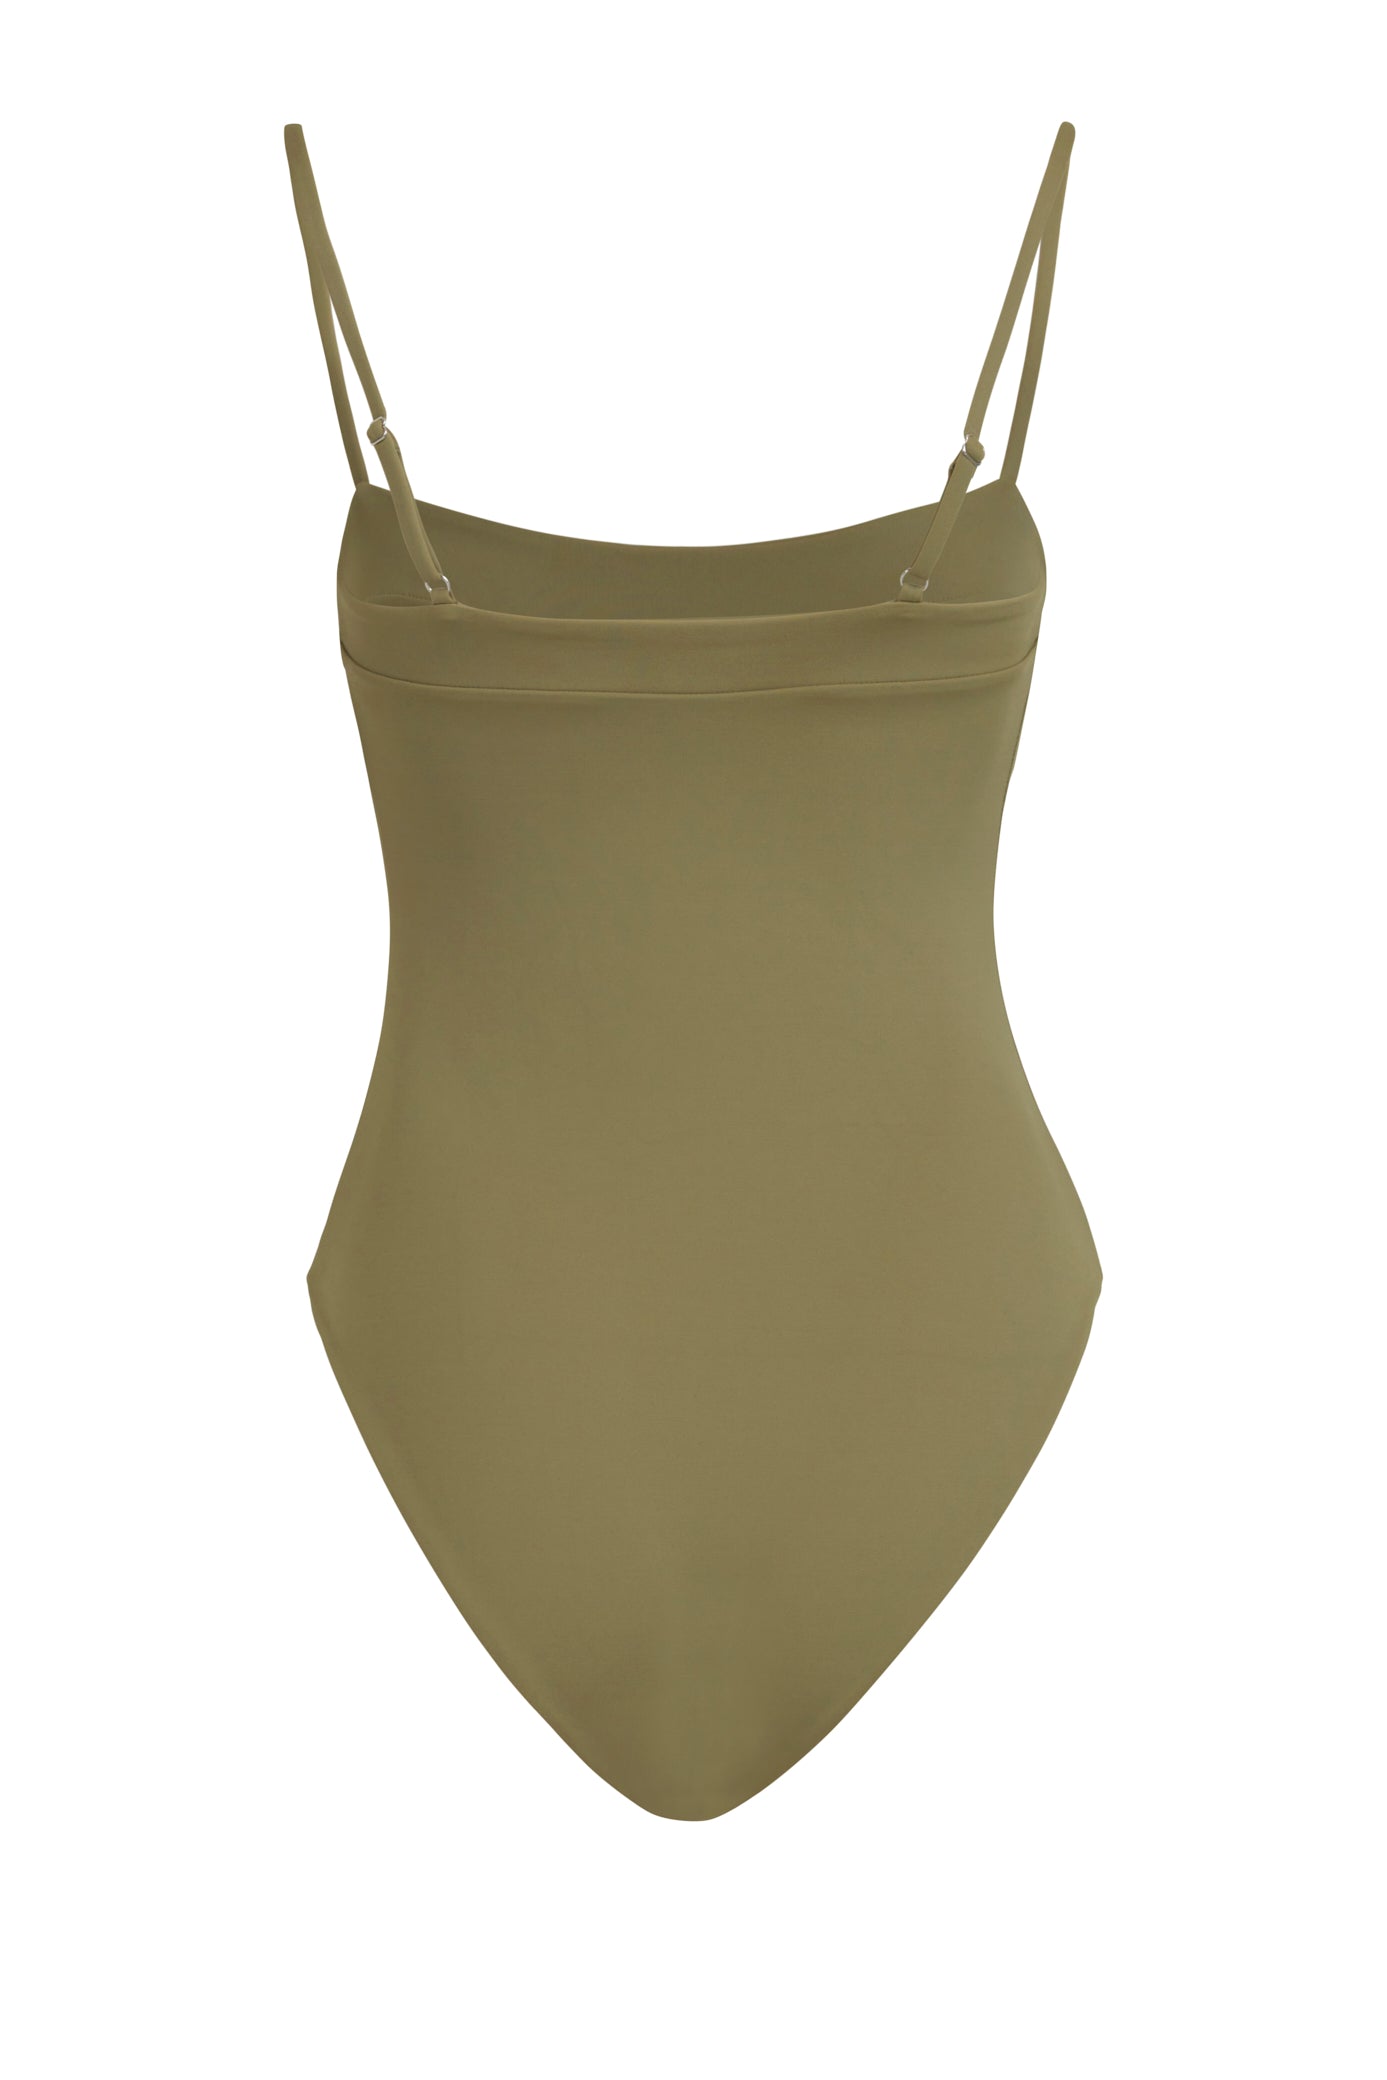 The Cera Suit in Olive